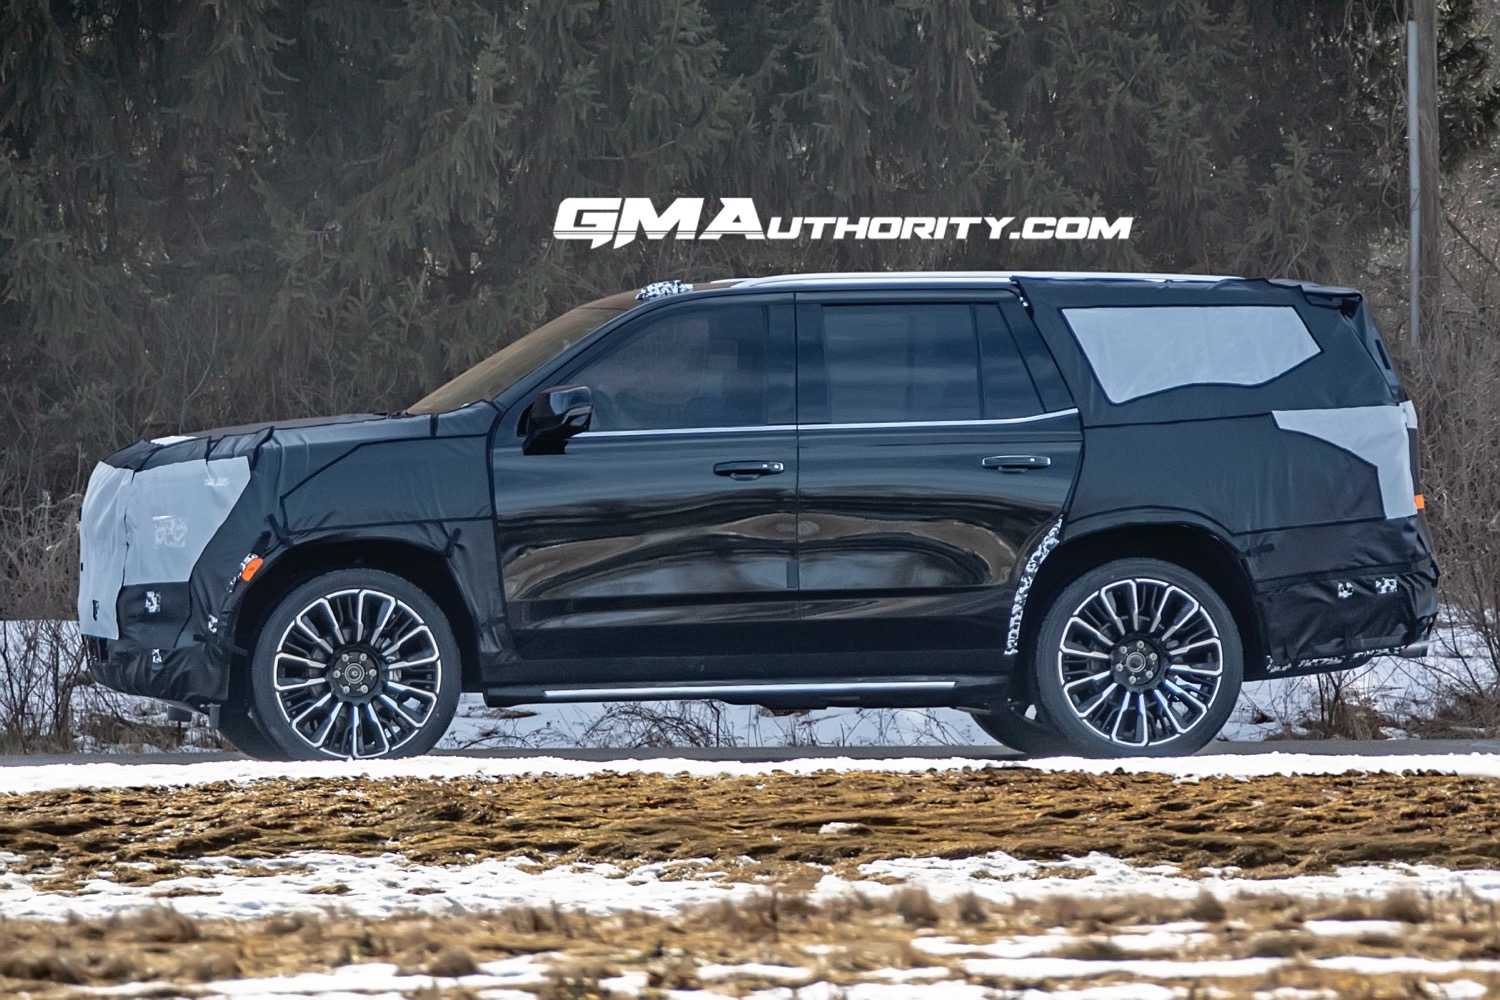 What We Want From The 2024 Chevy Tahoe, Suburban Refresh